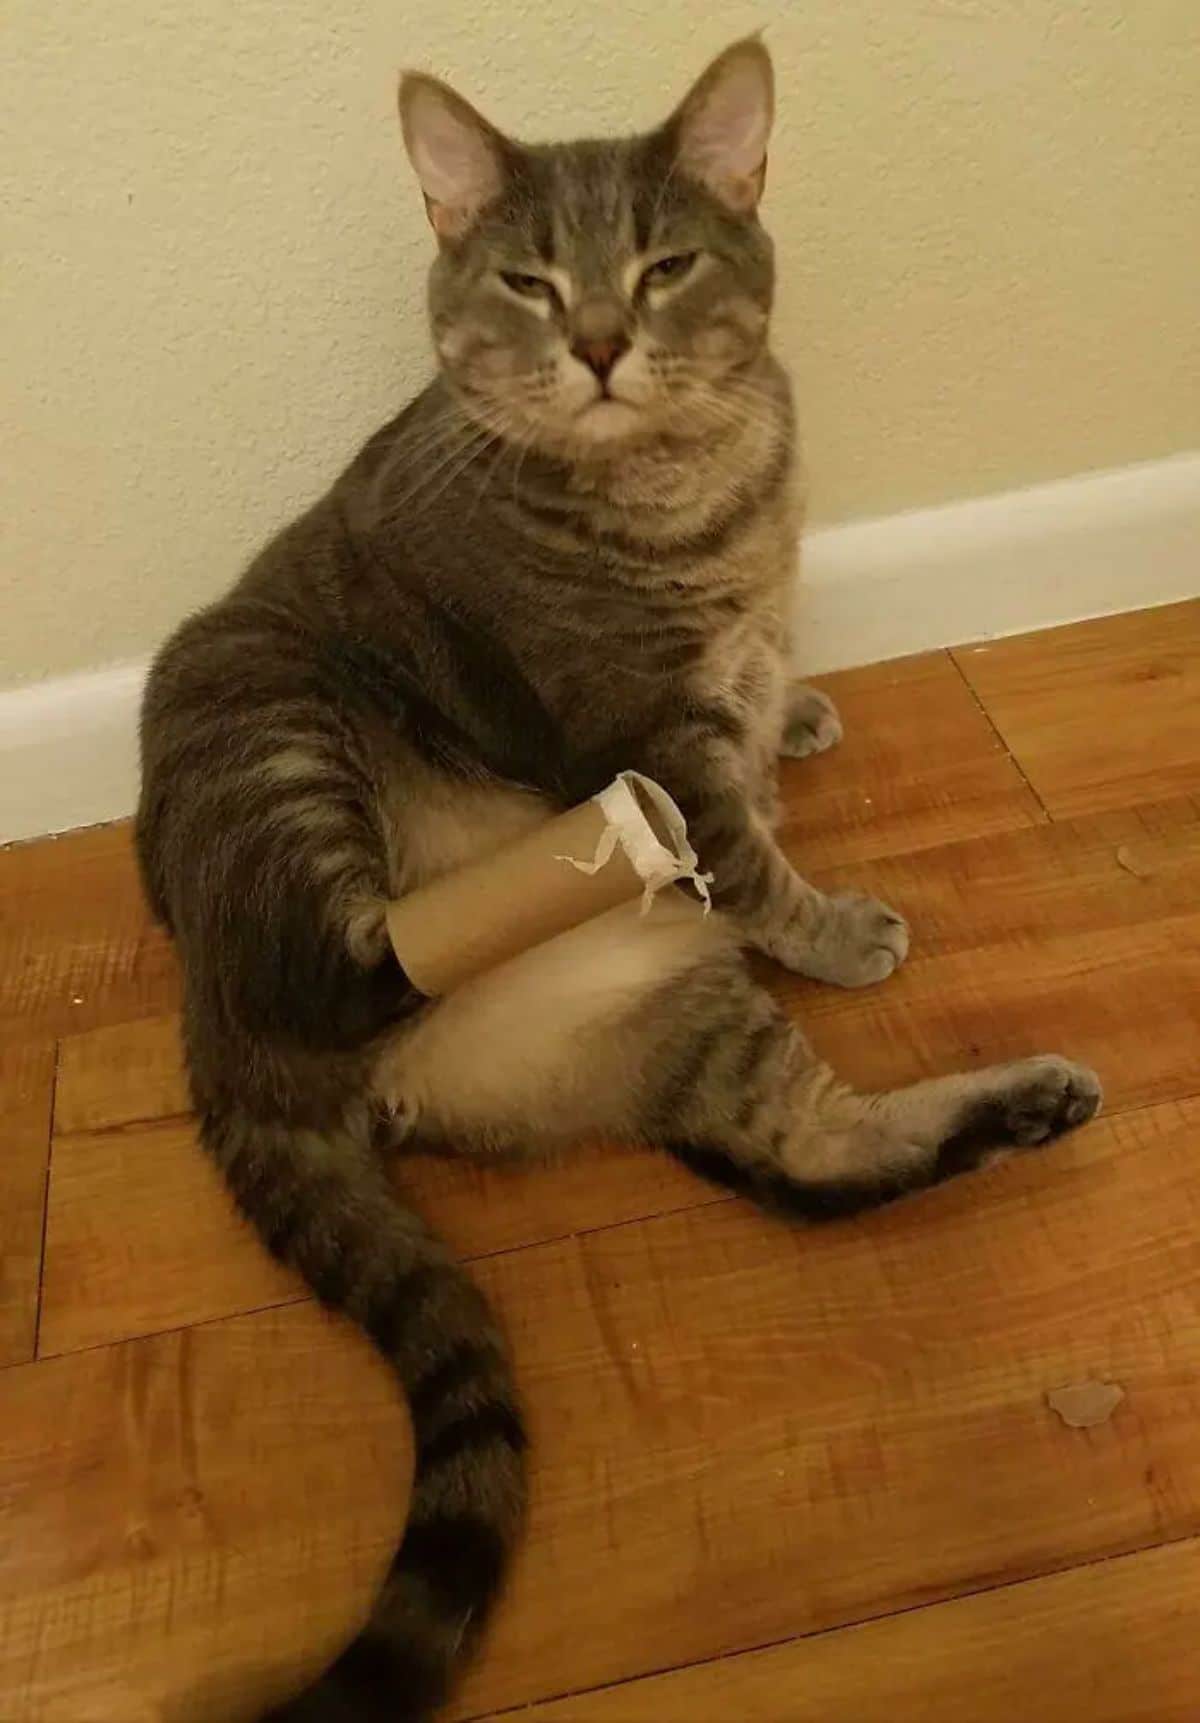 brown tabby cat sitting on wooden floor with one leg stuck inside an empty toilet paper roll